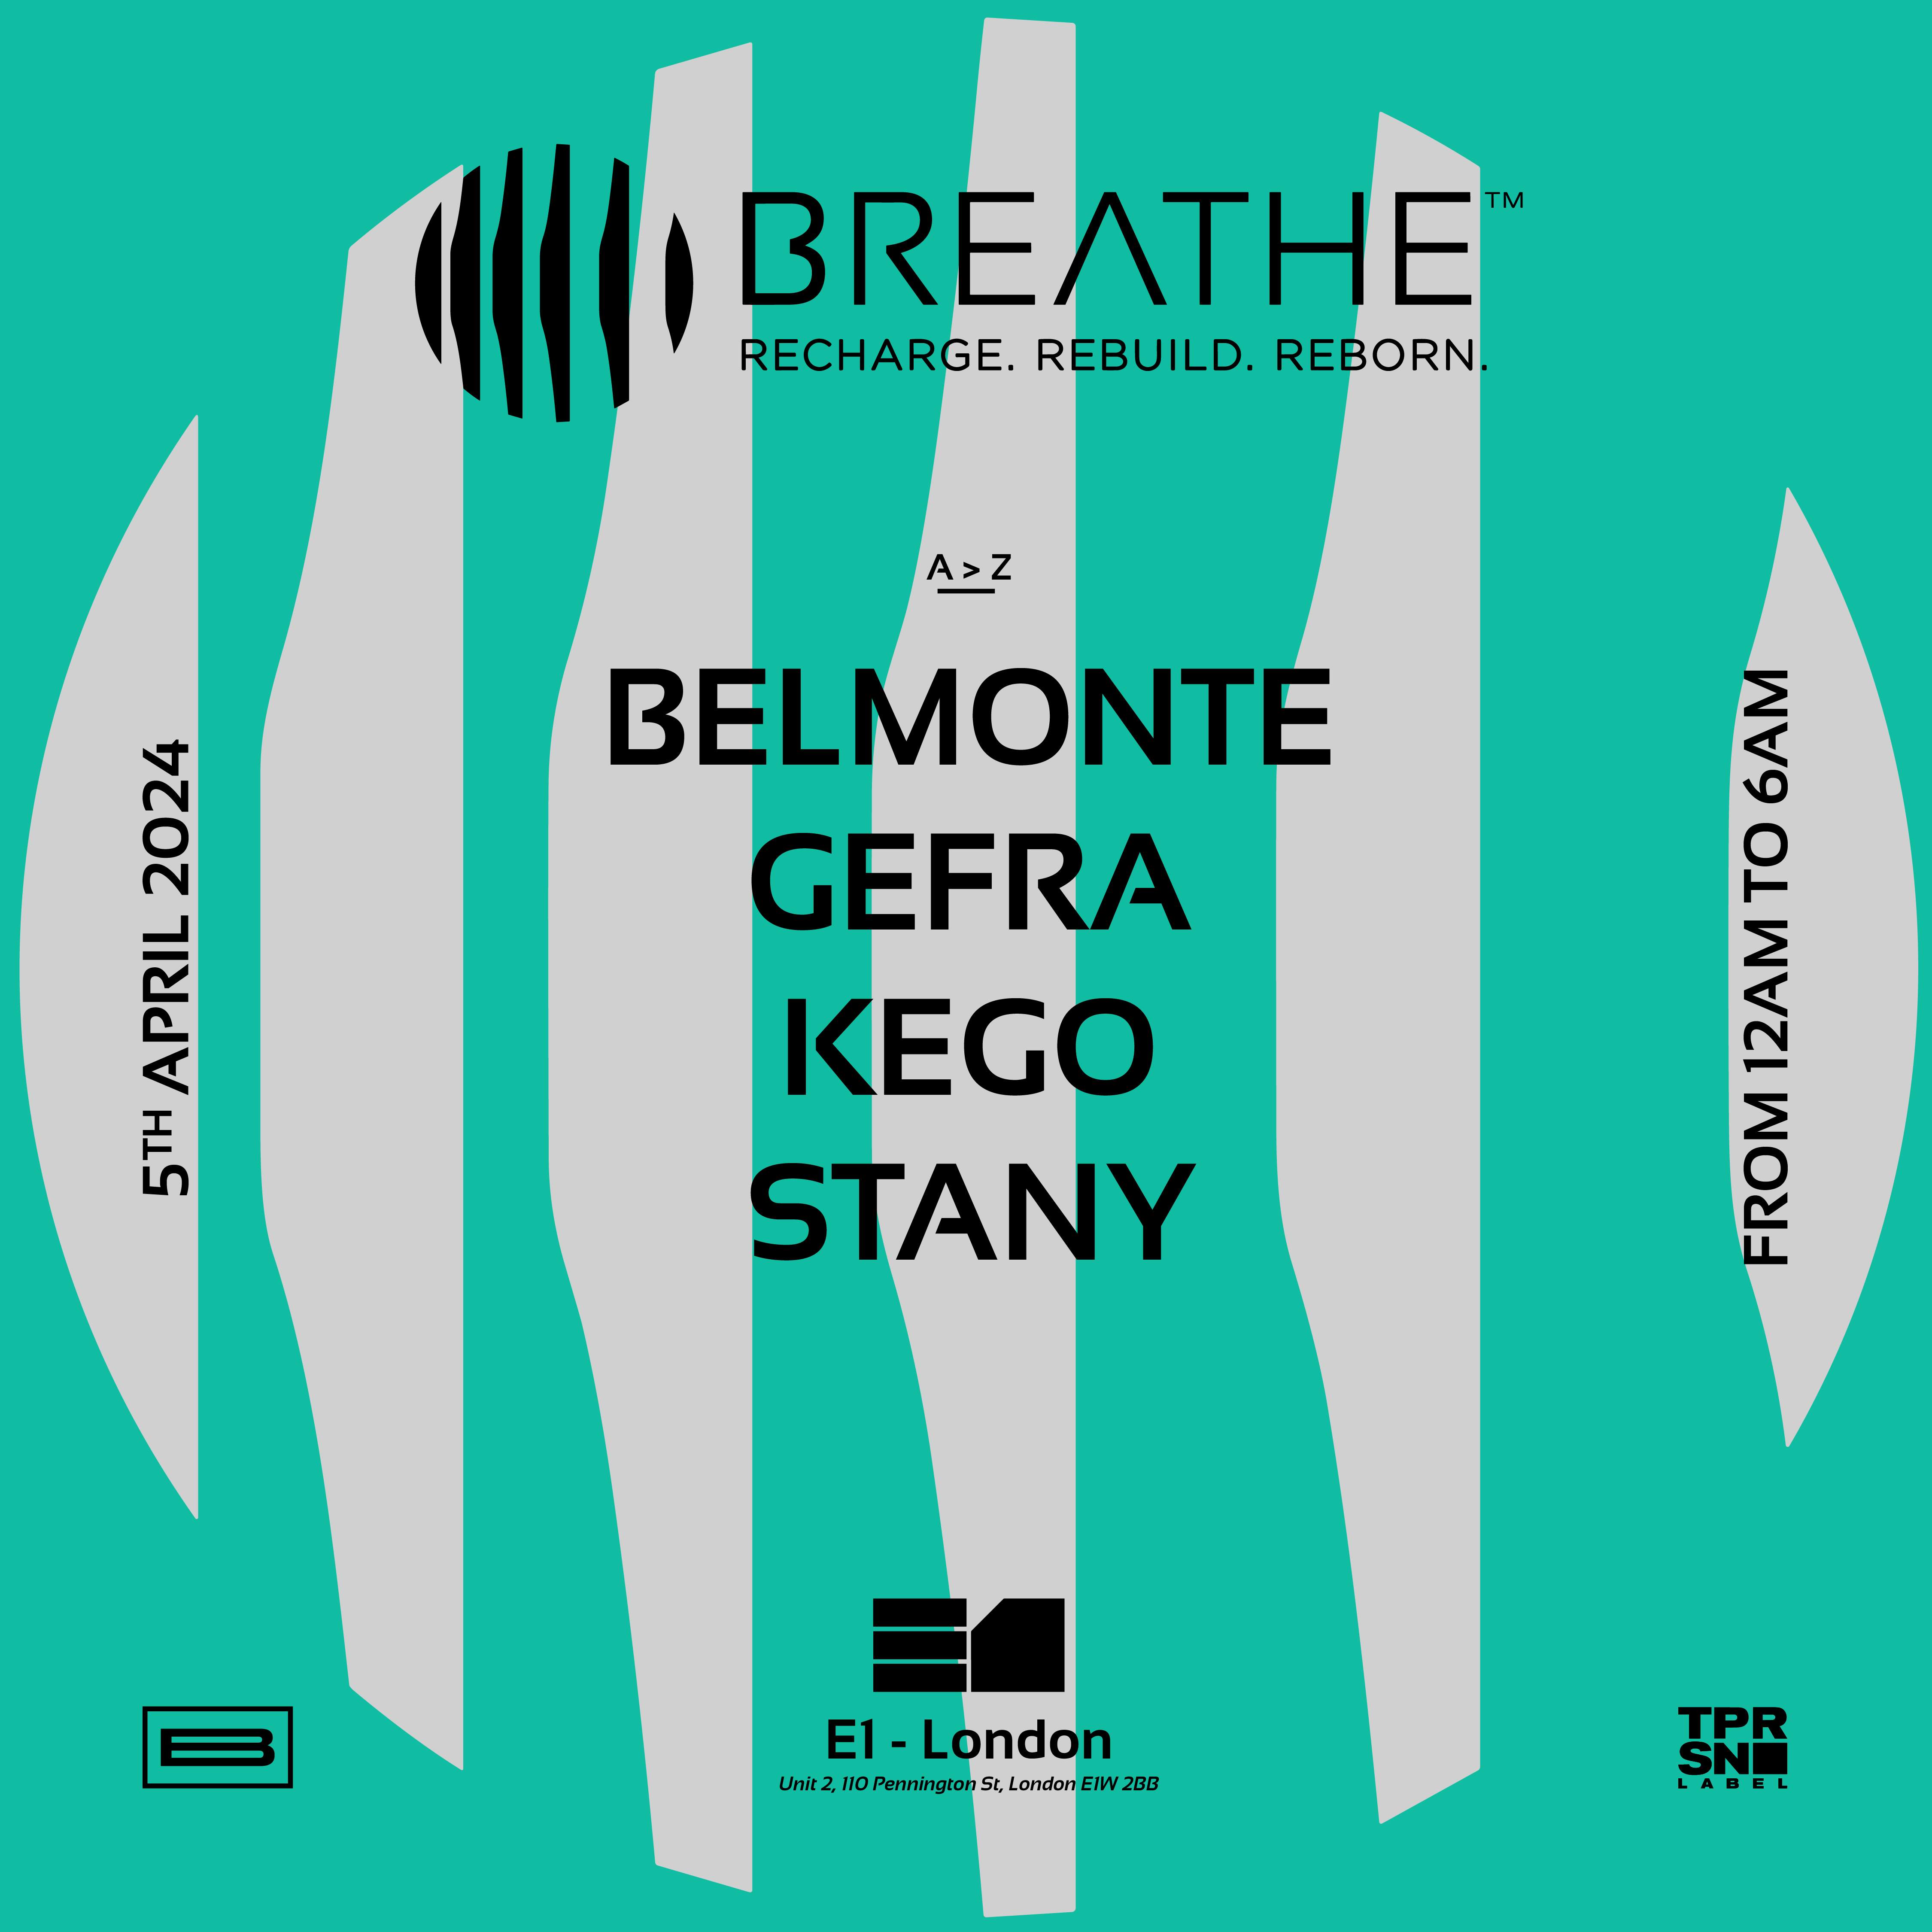 BREATHE: Opening party with Belmonte, Gefra, Kego, Stany - フライヤー裏